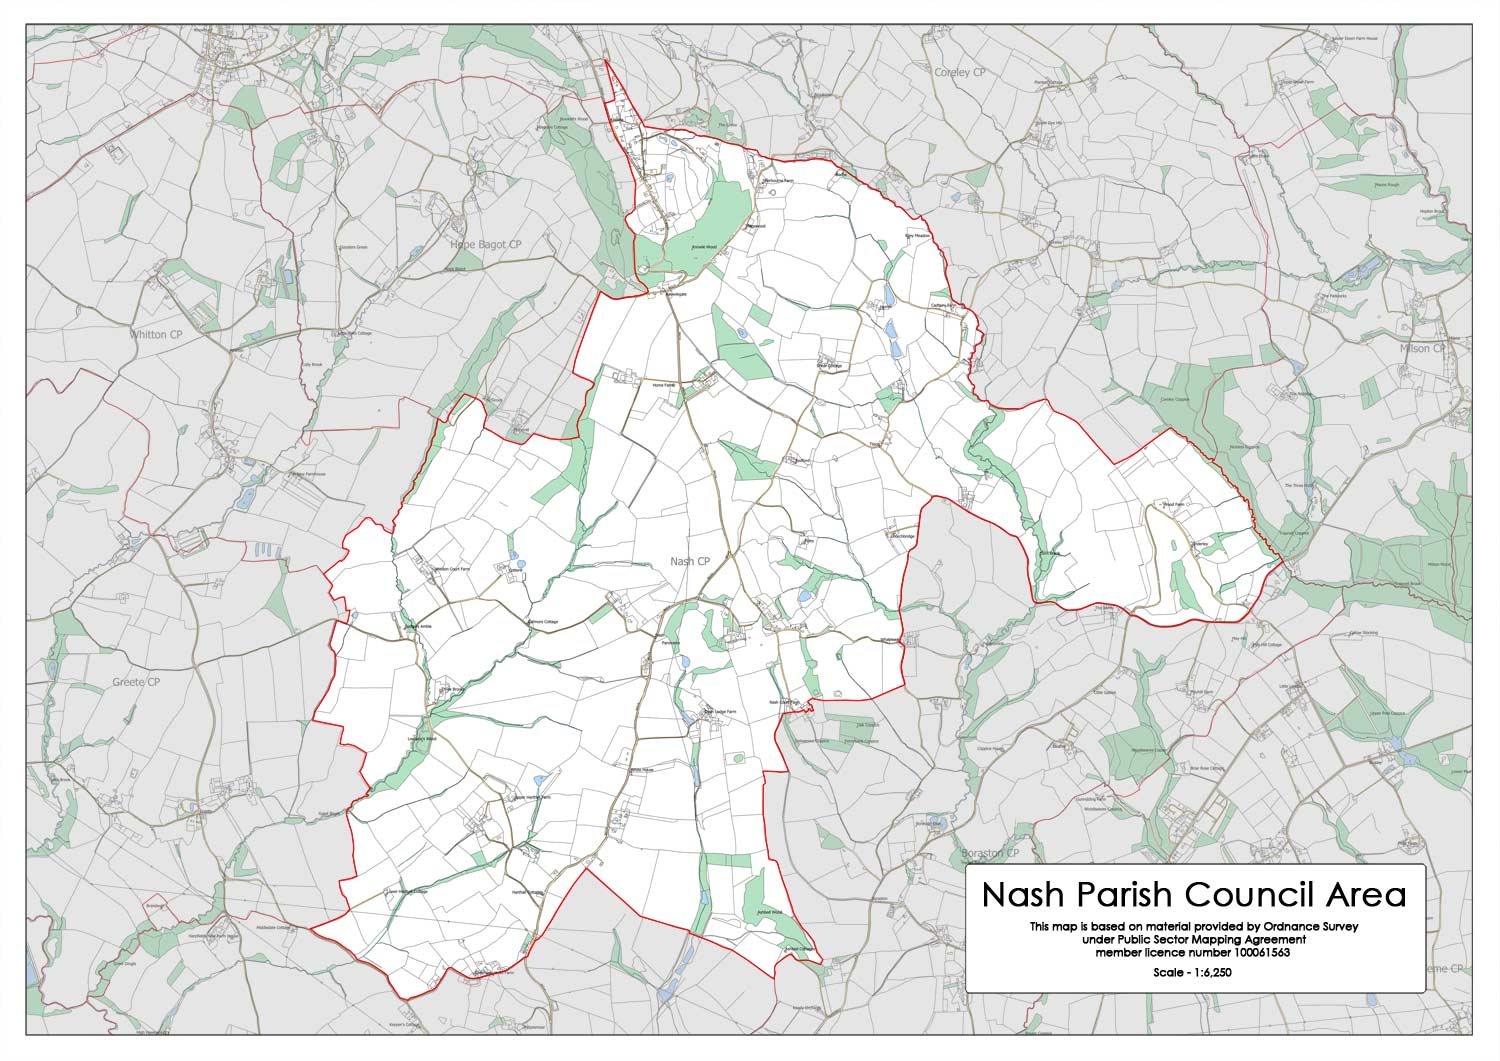 Nash Parish Field & Property Map - CLICK IMAGE TO VIEW/DOWNLOAD